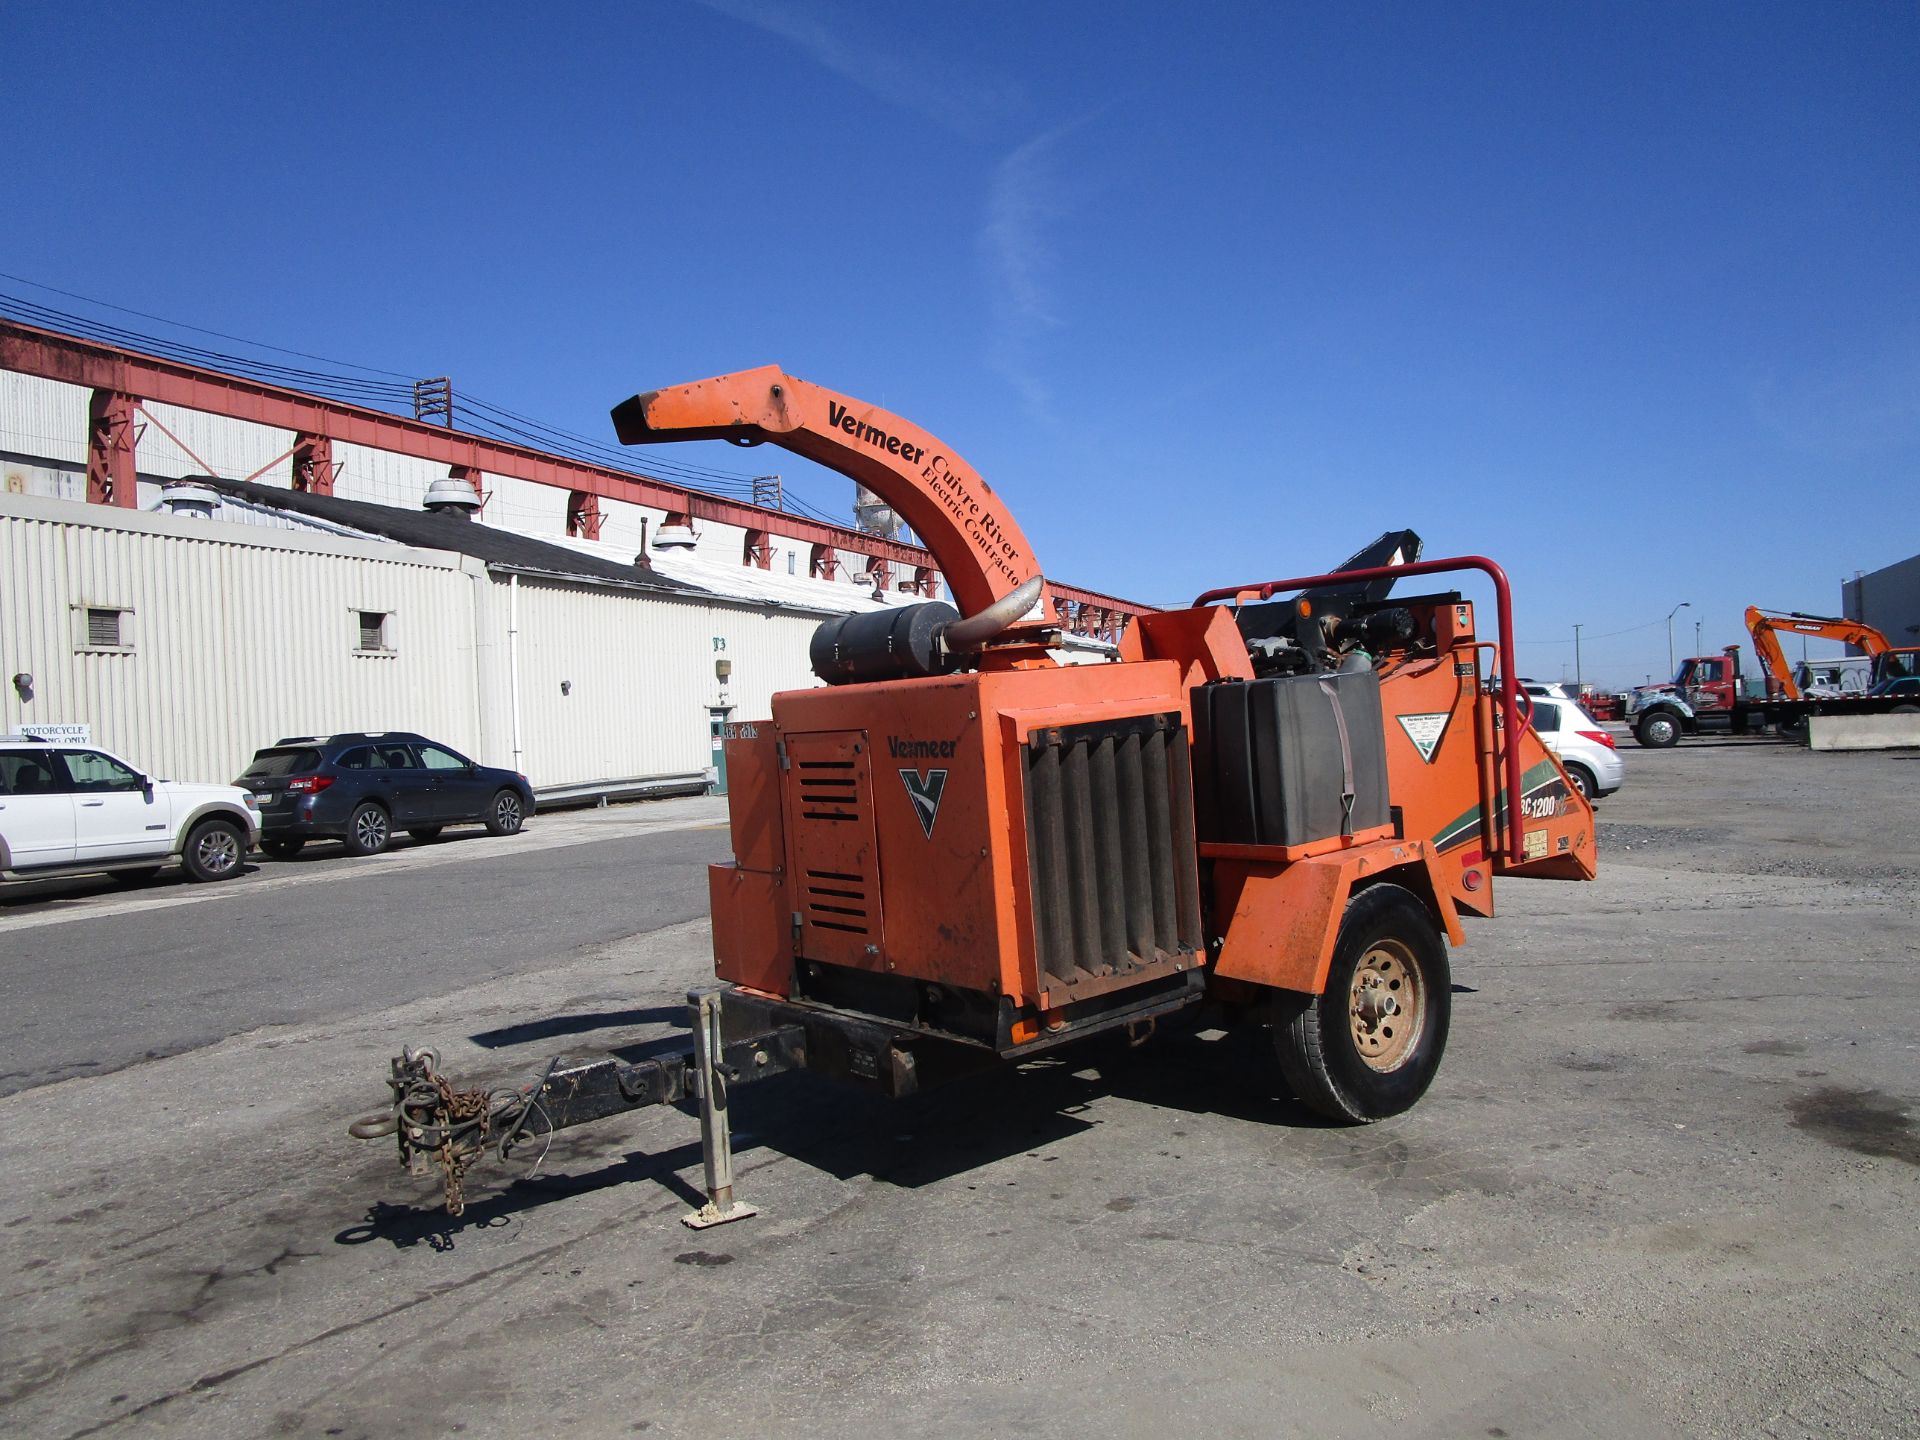 2011 Vermeer BC1200 Chipper - Image 3 of 10